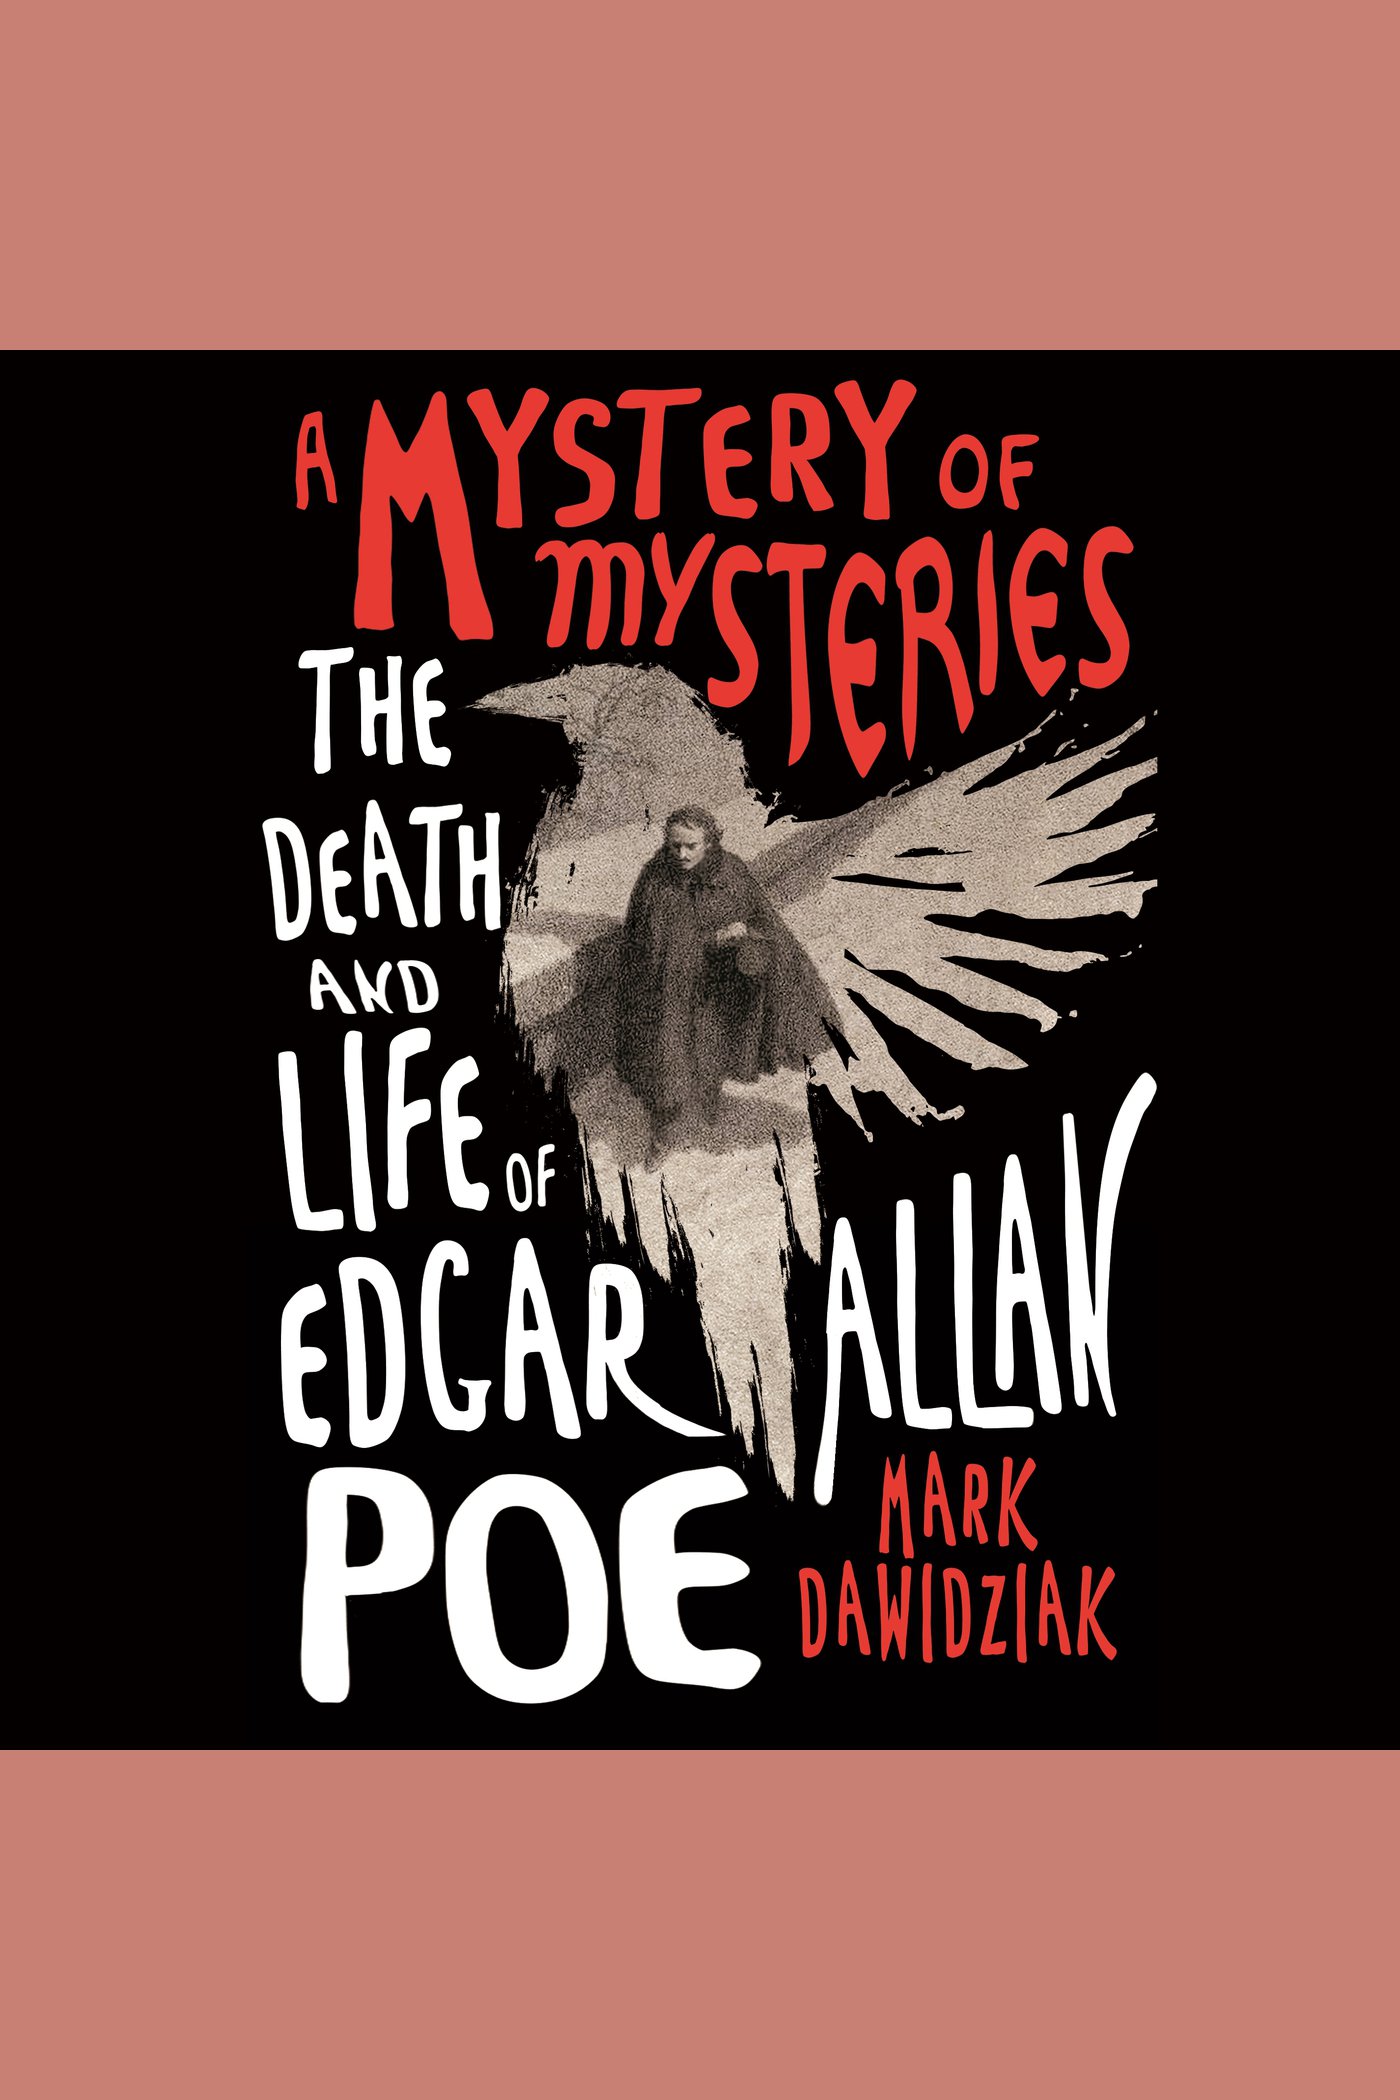 A Mystery of Mysteries, The Death and Life of Edgar Allan Poe